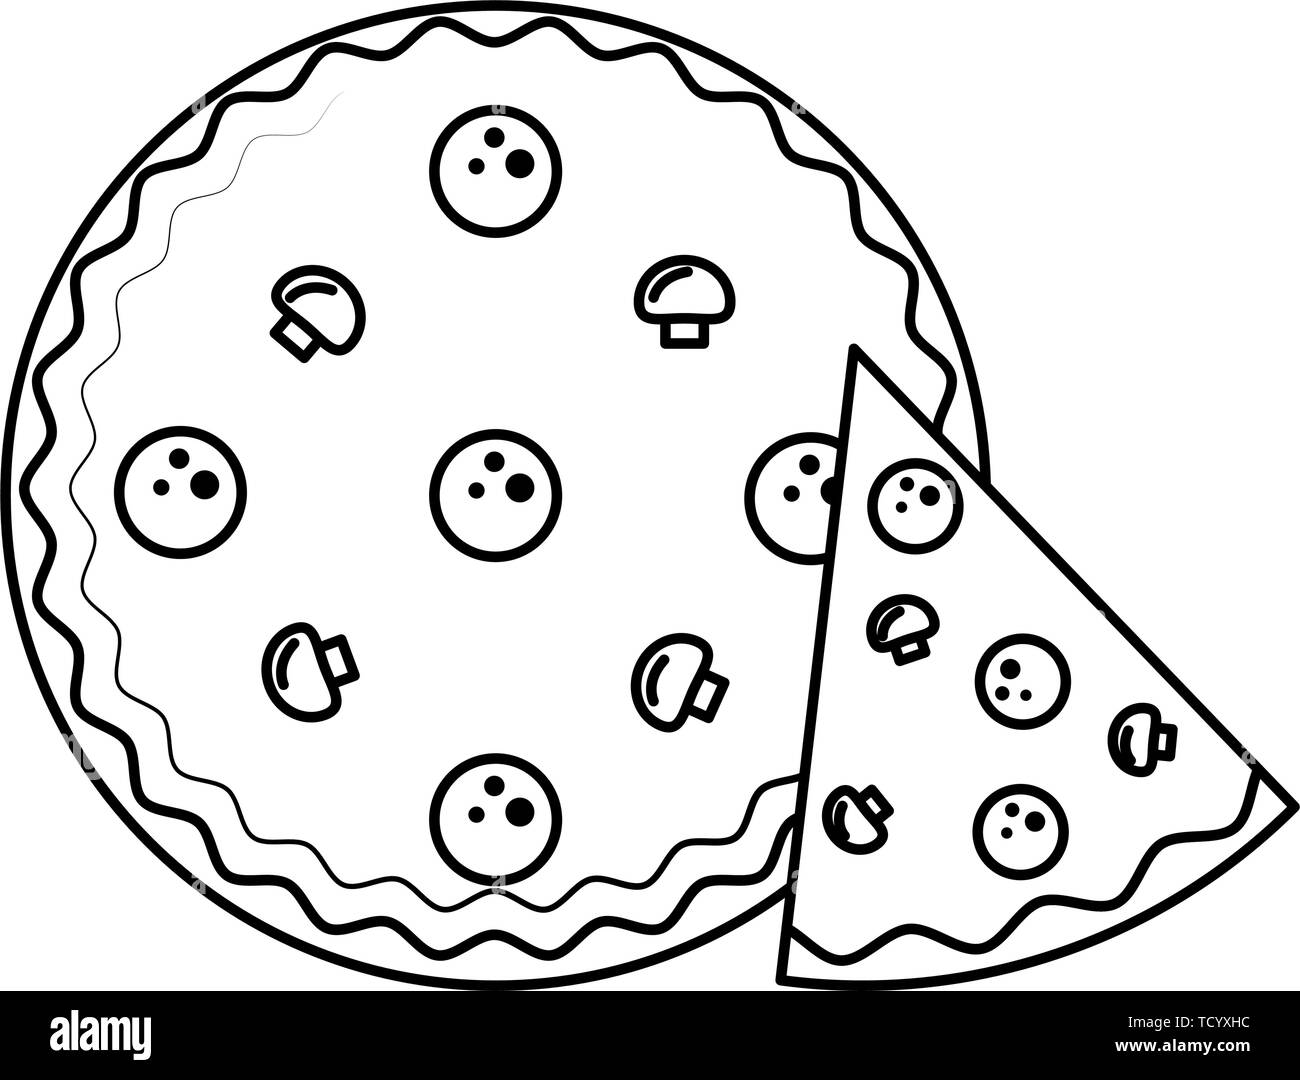 restaurant food and cuisine cartoons in black and white Stock Vector